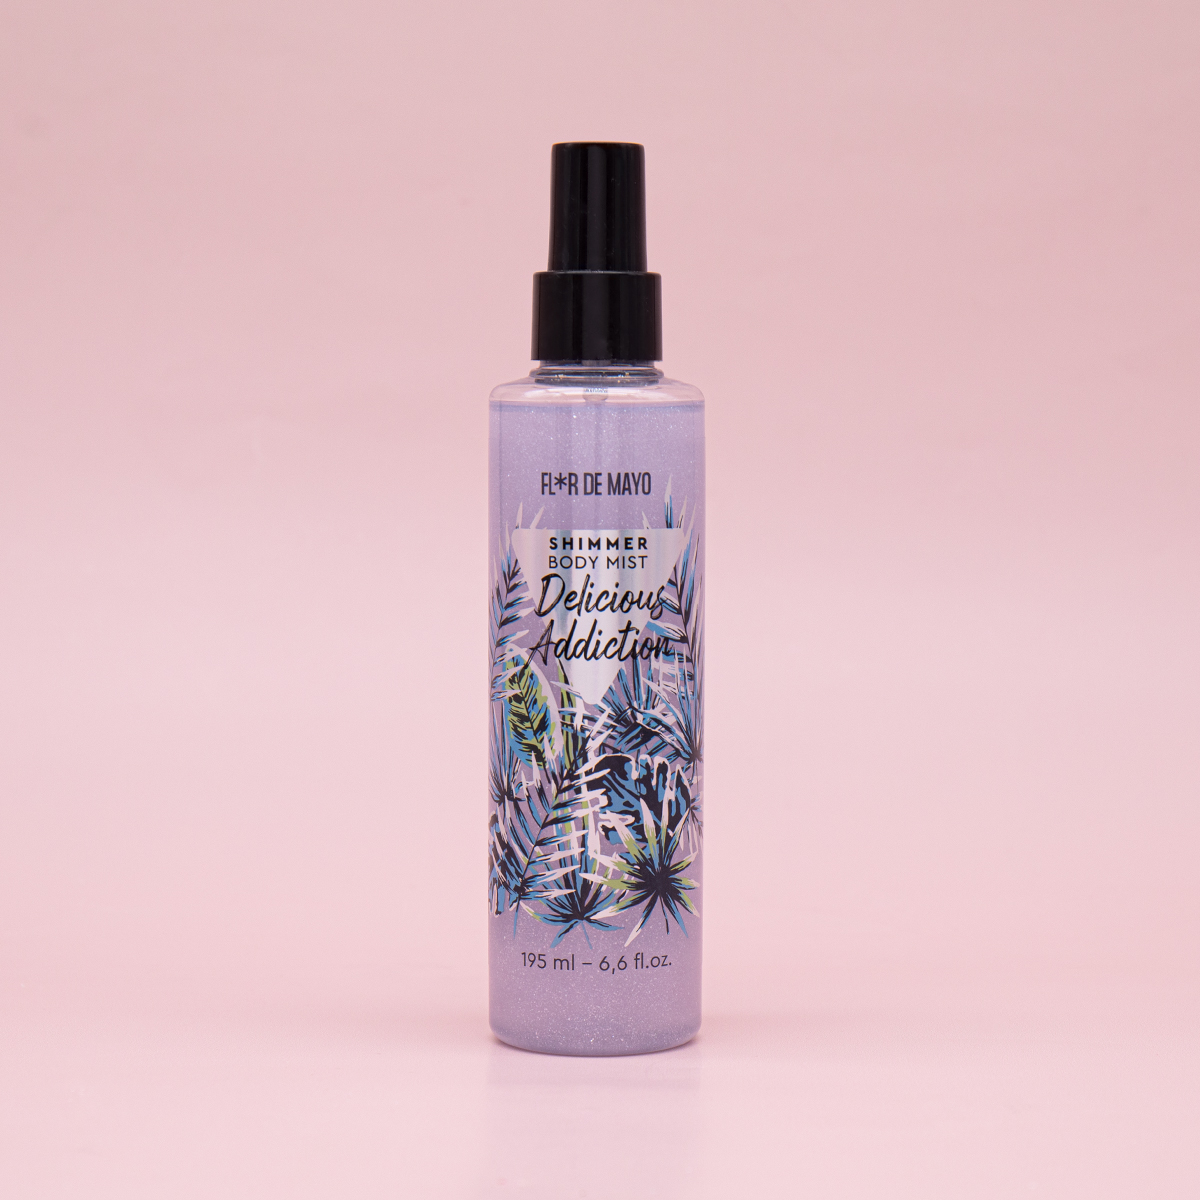 Shimmer Body Mist - DELICIOUS ADDICTION